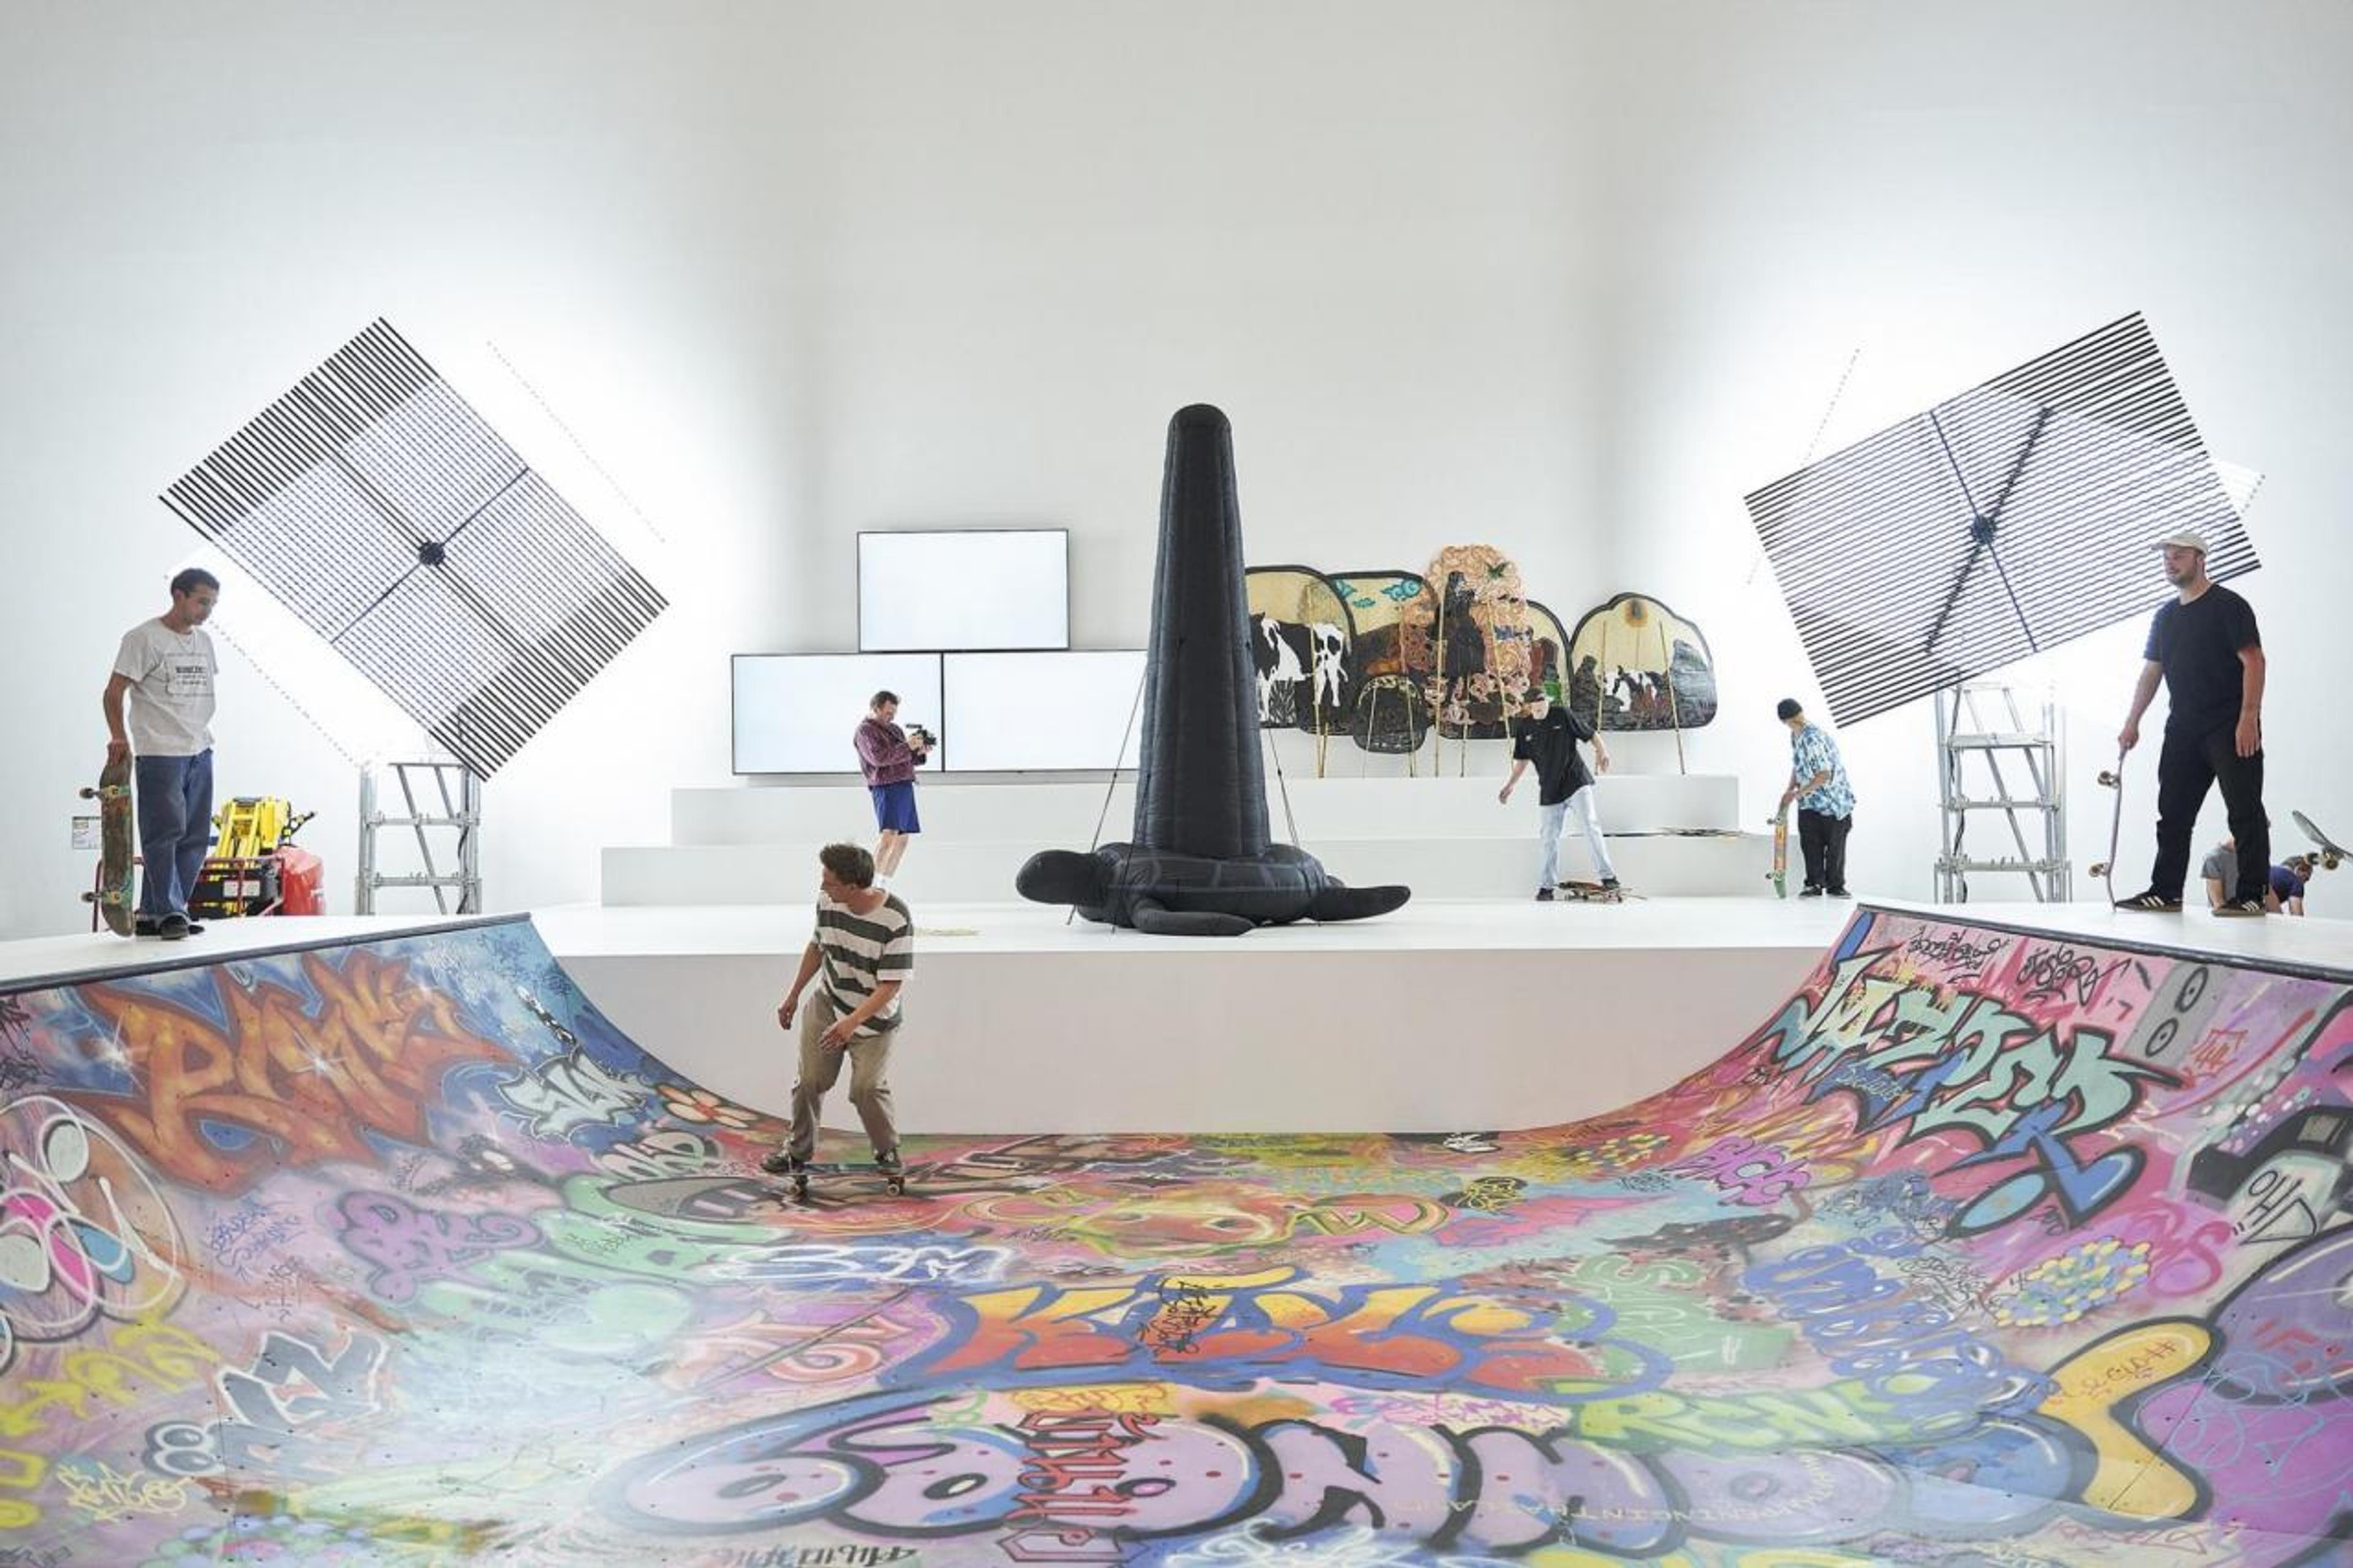 Baan Noorg Collaborative Arts and Culture, The Rituals of Things , 2022. Installation view, Fridericianum, 2022, Kassel. Photo: Nicolas Wefers